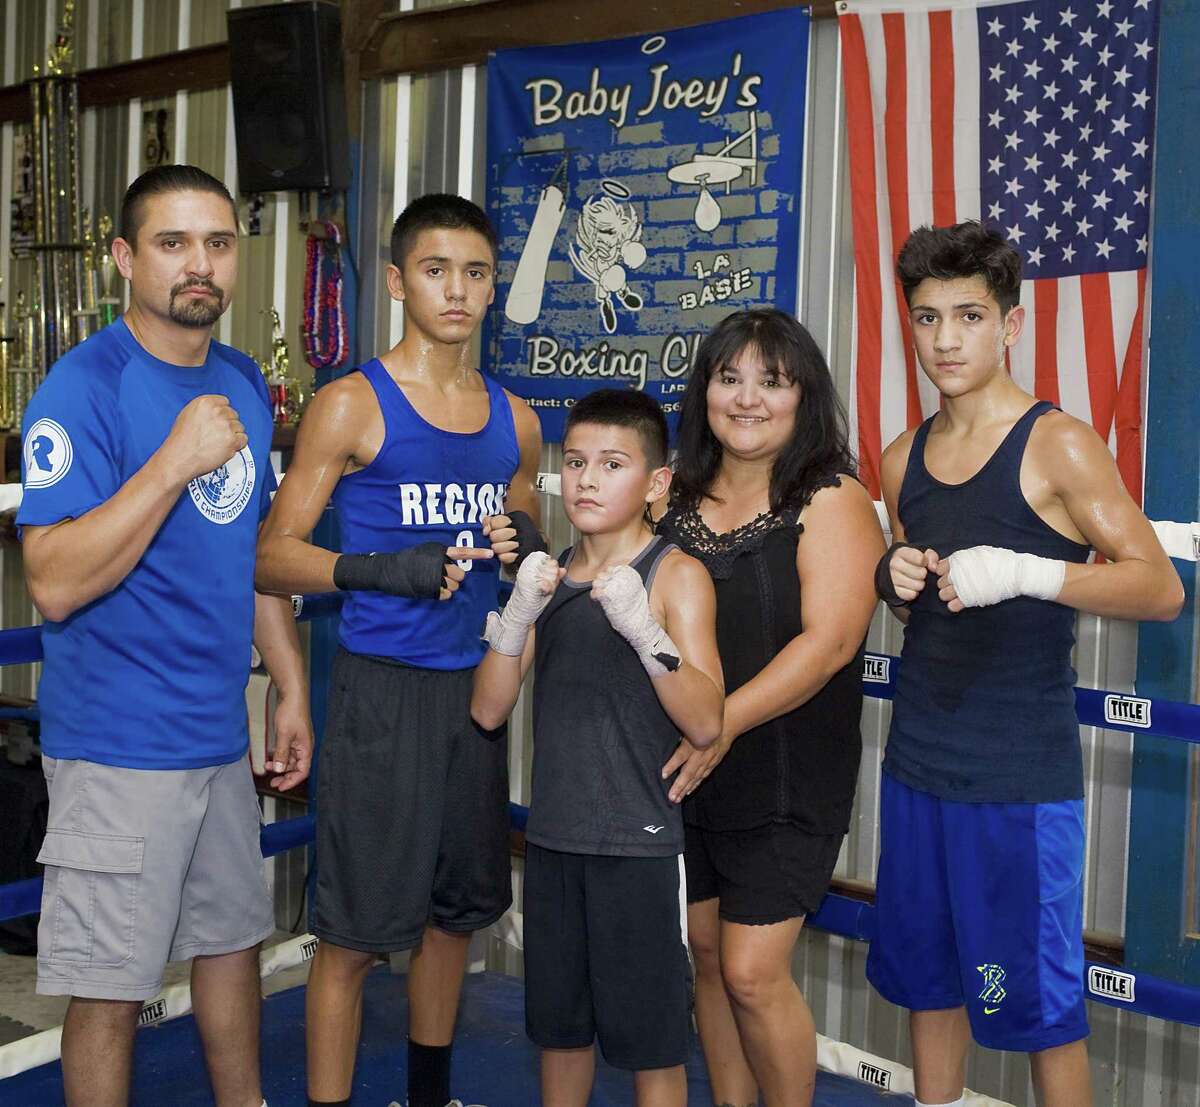 Baby Joey's Boxing Club